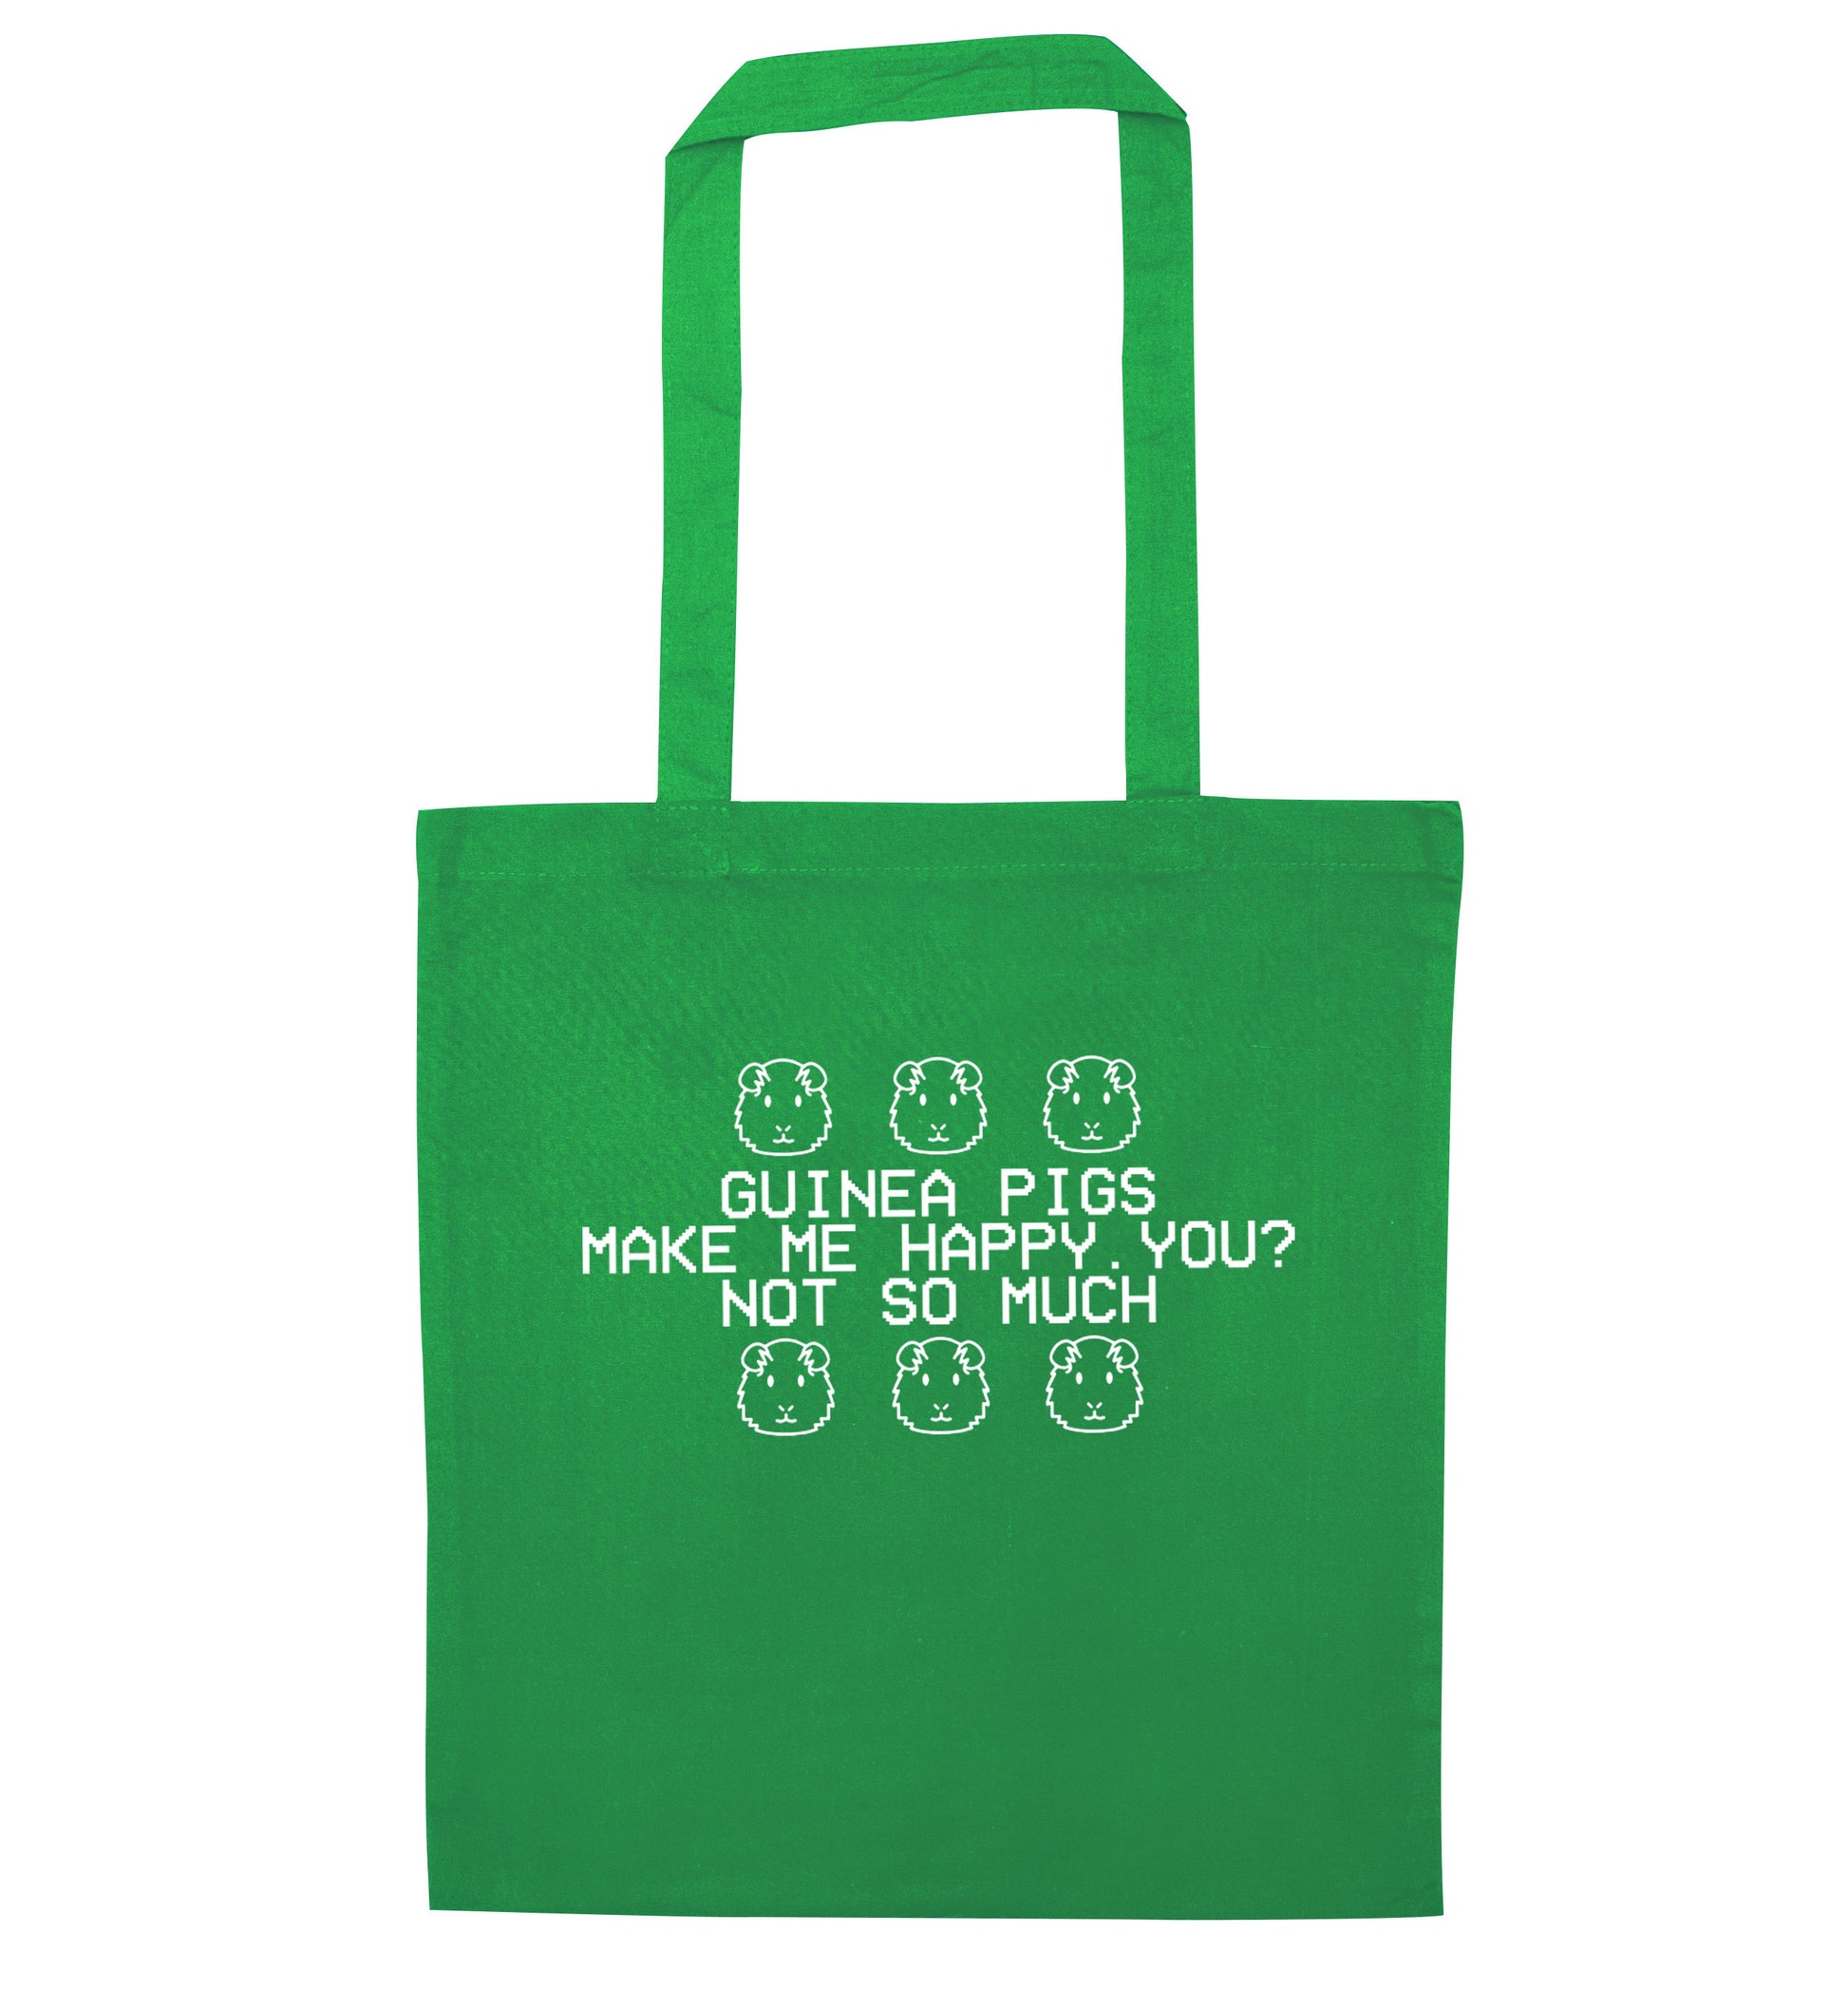 Guinea pigs make me happy, you not so much green tote bag